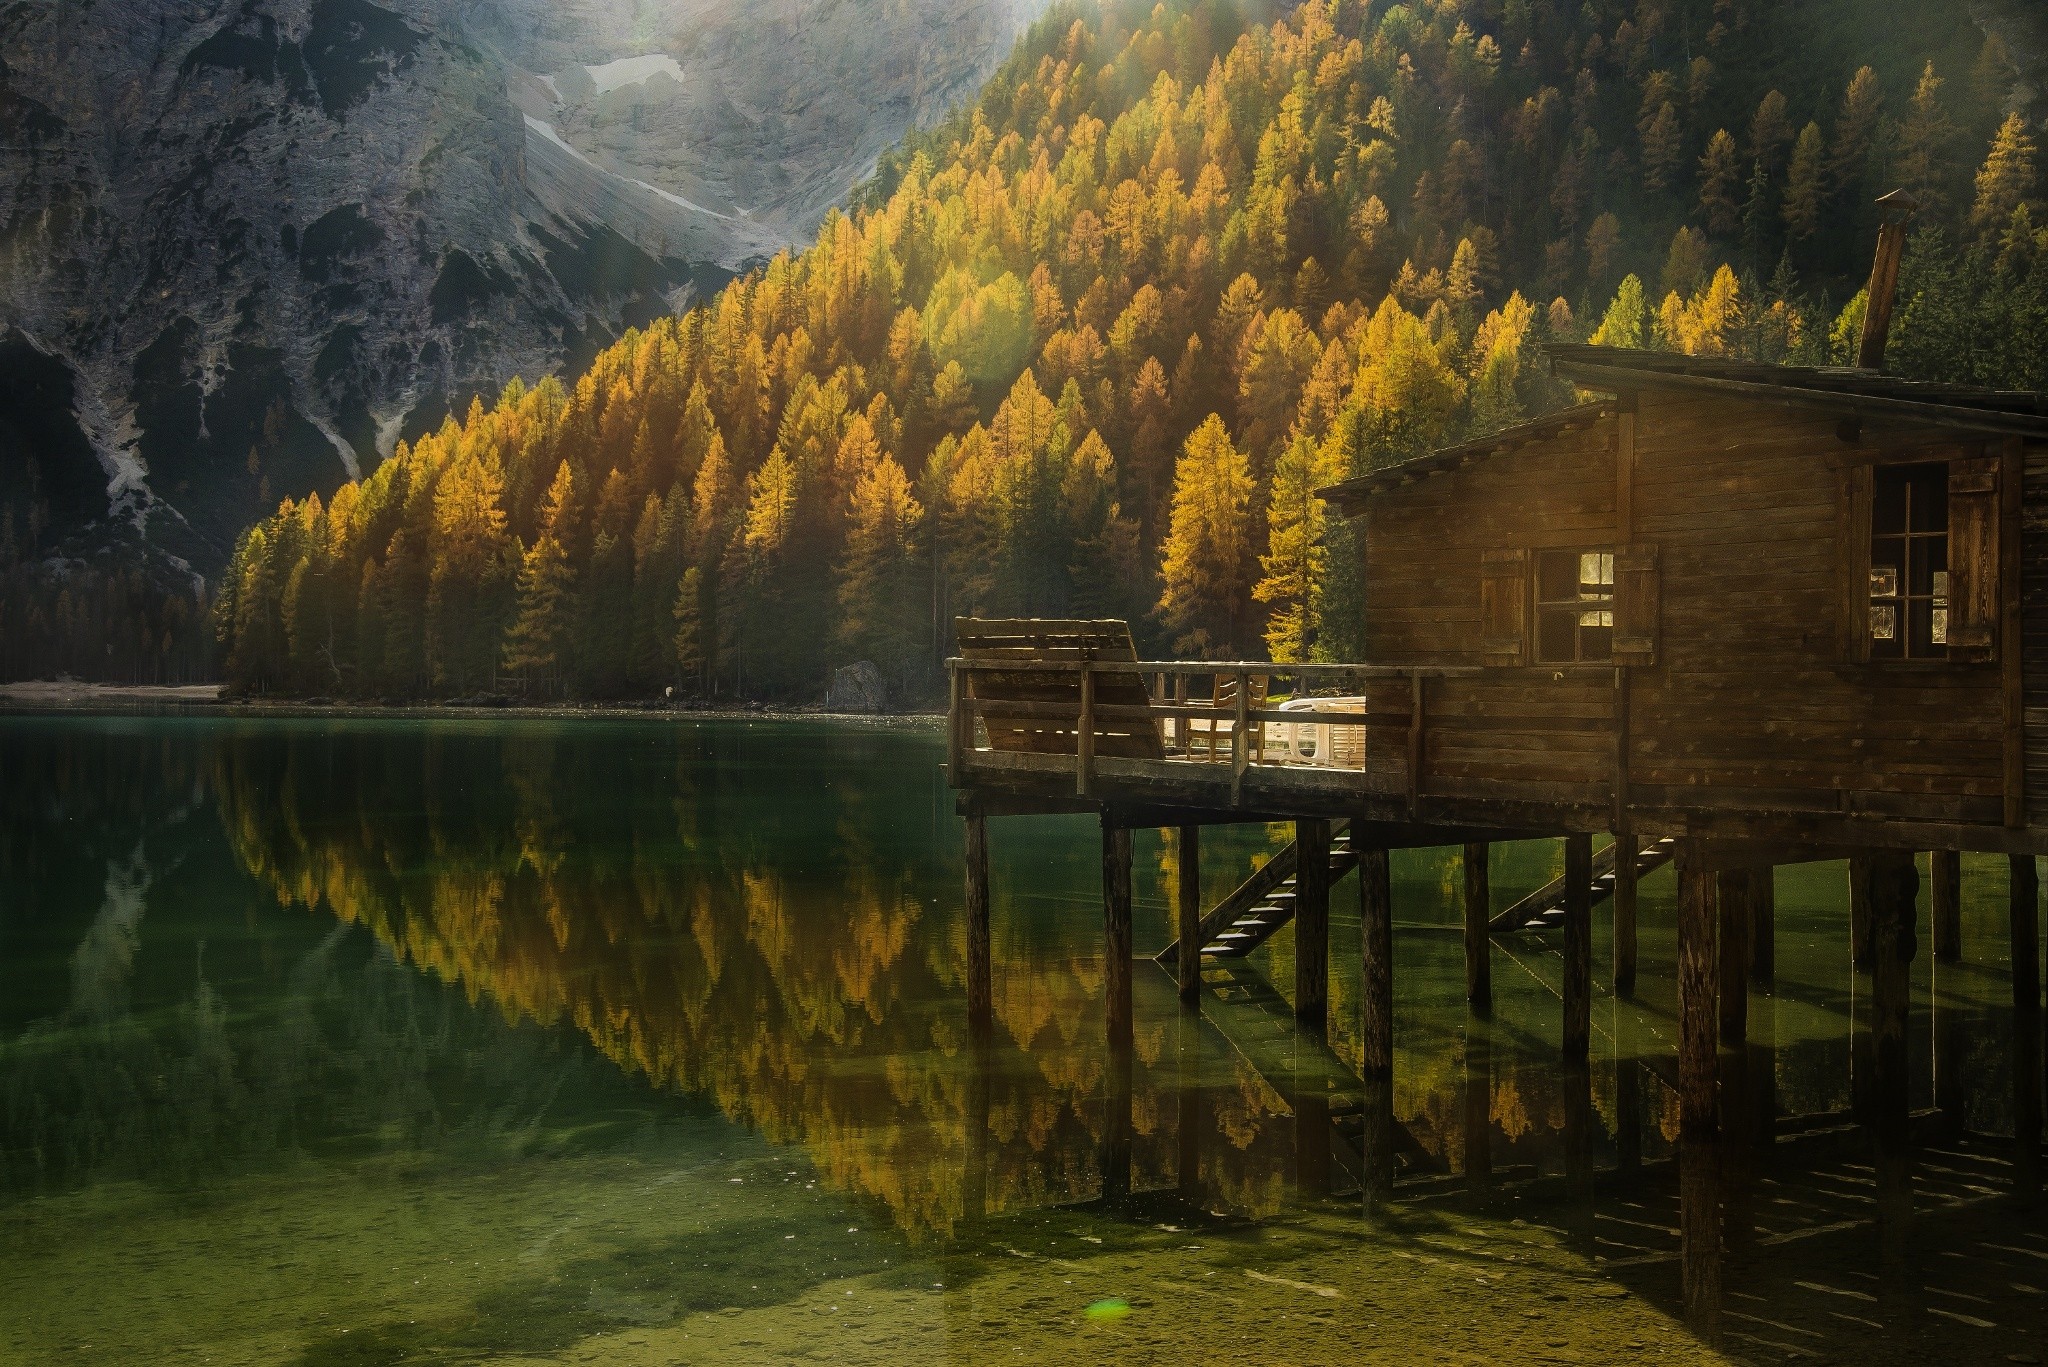 General 2048x1367 landscape nature fall forest lake cabin reflection sunlight Italy boathouses Pragser Wildsee mountains